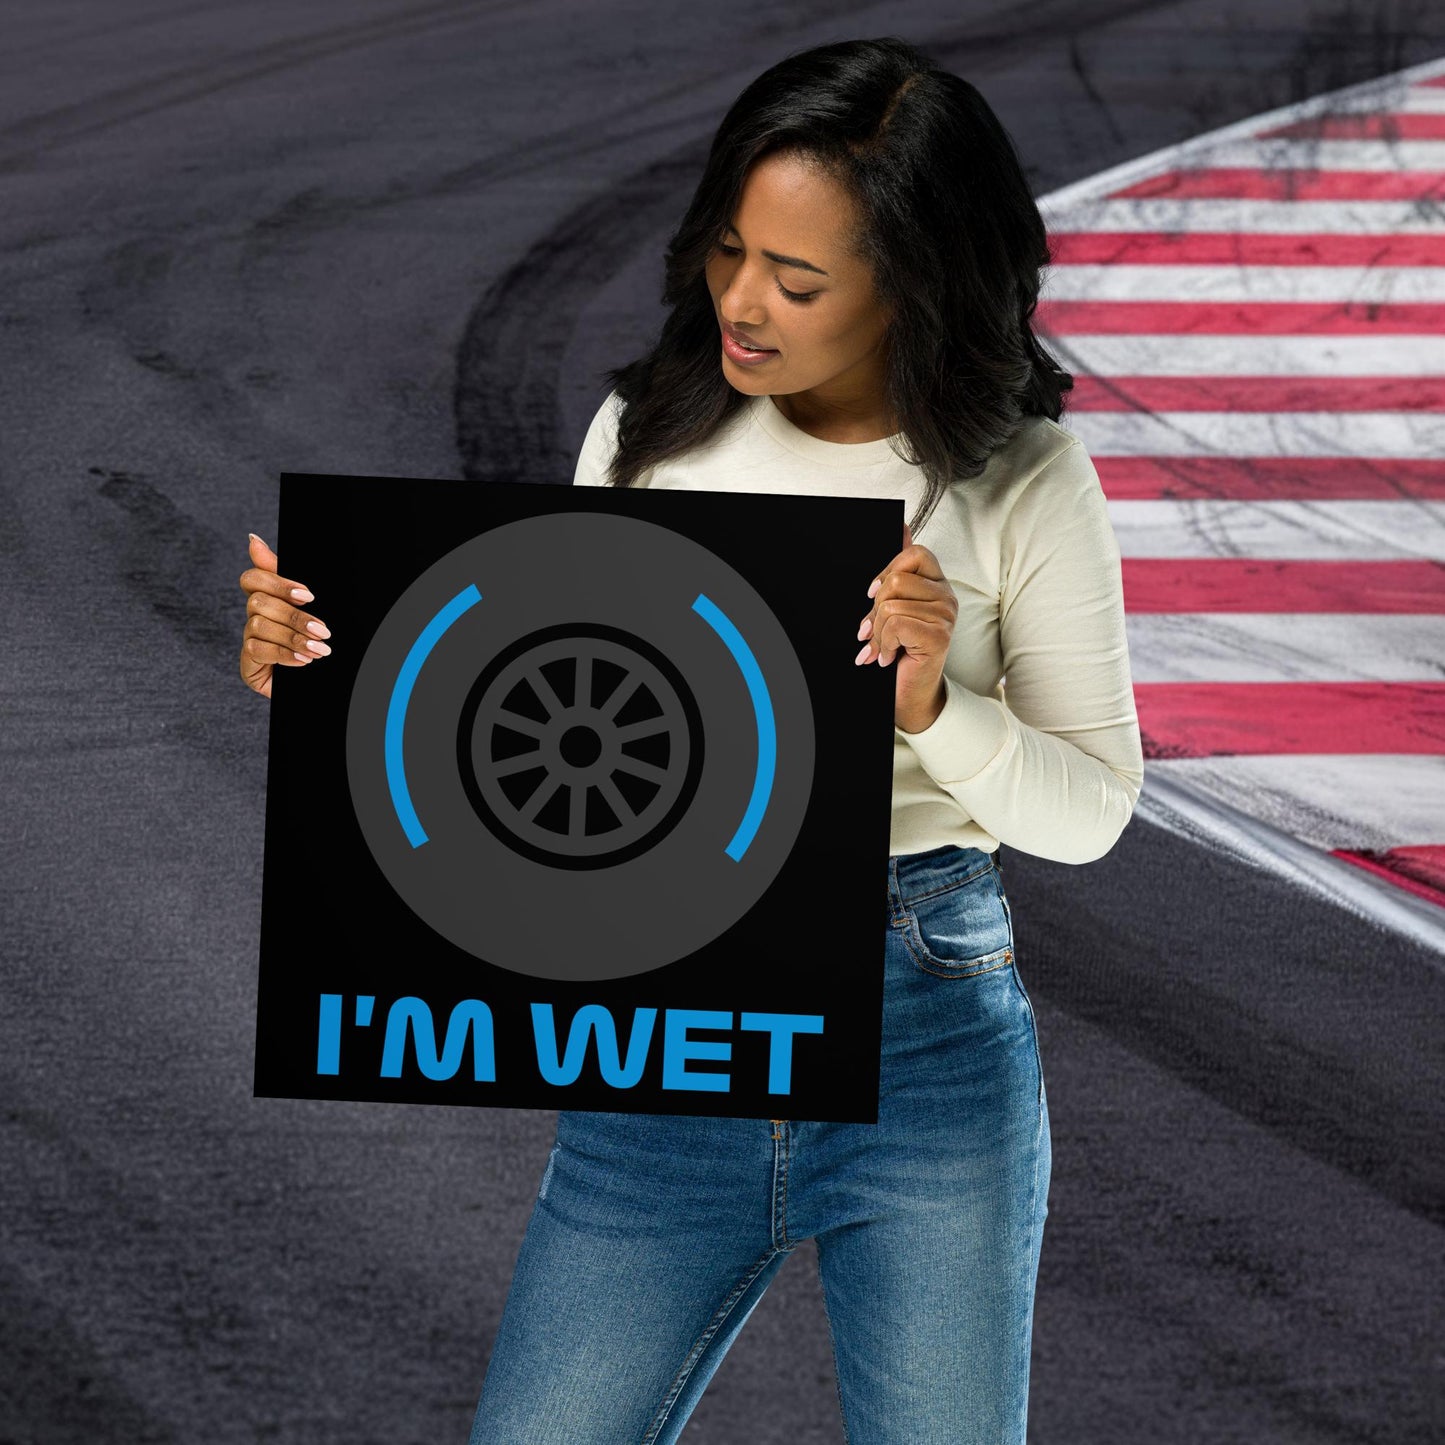 I'm Wet Tyres Funny F1 Poster Next Cult Brand